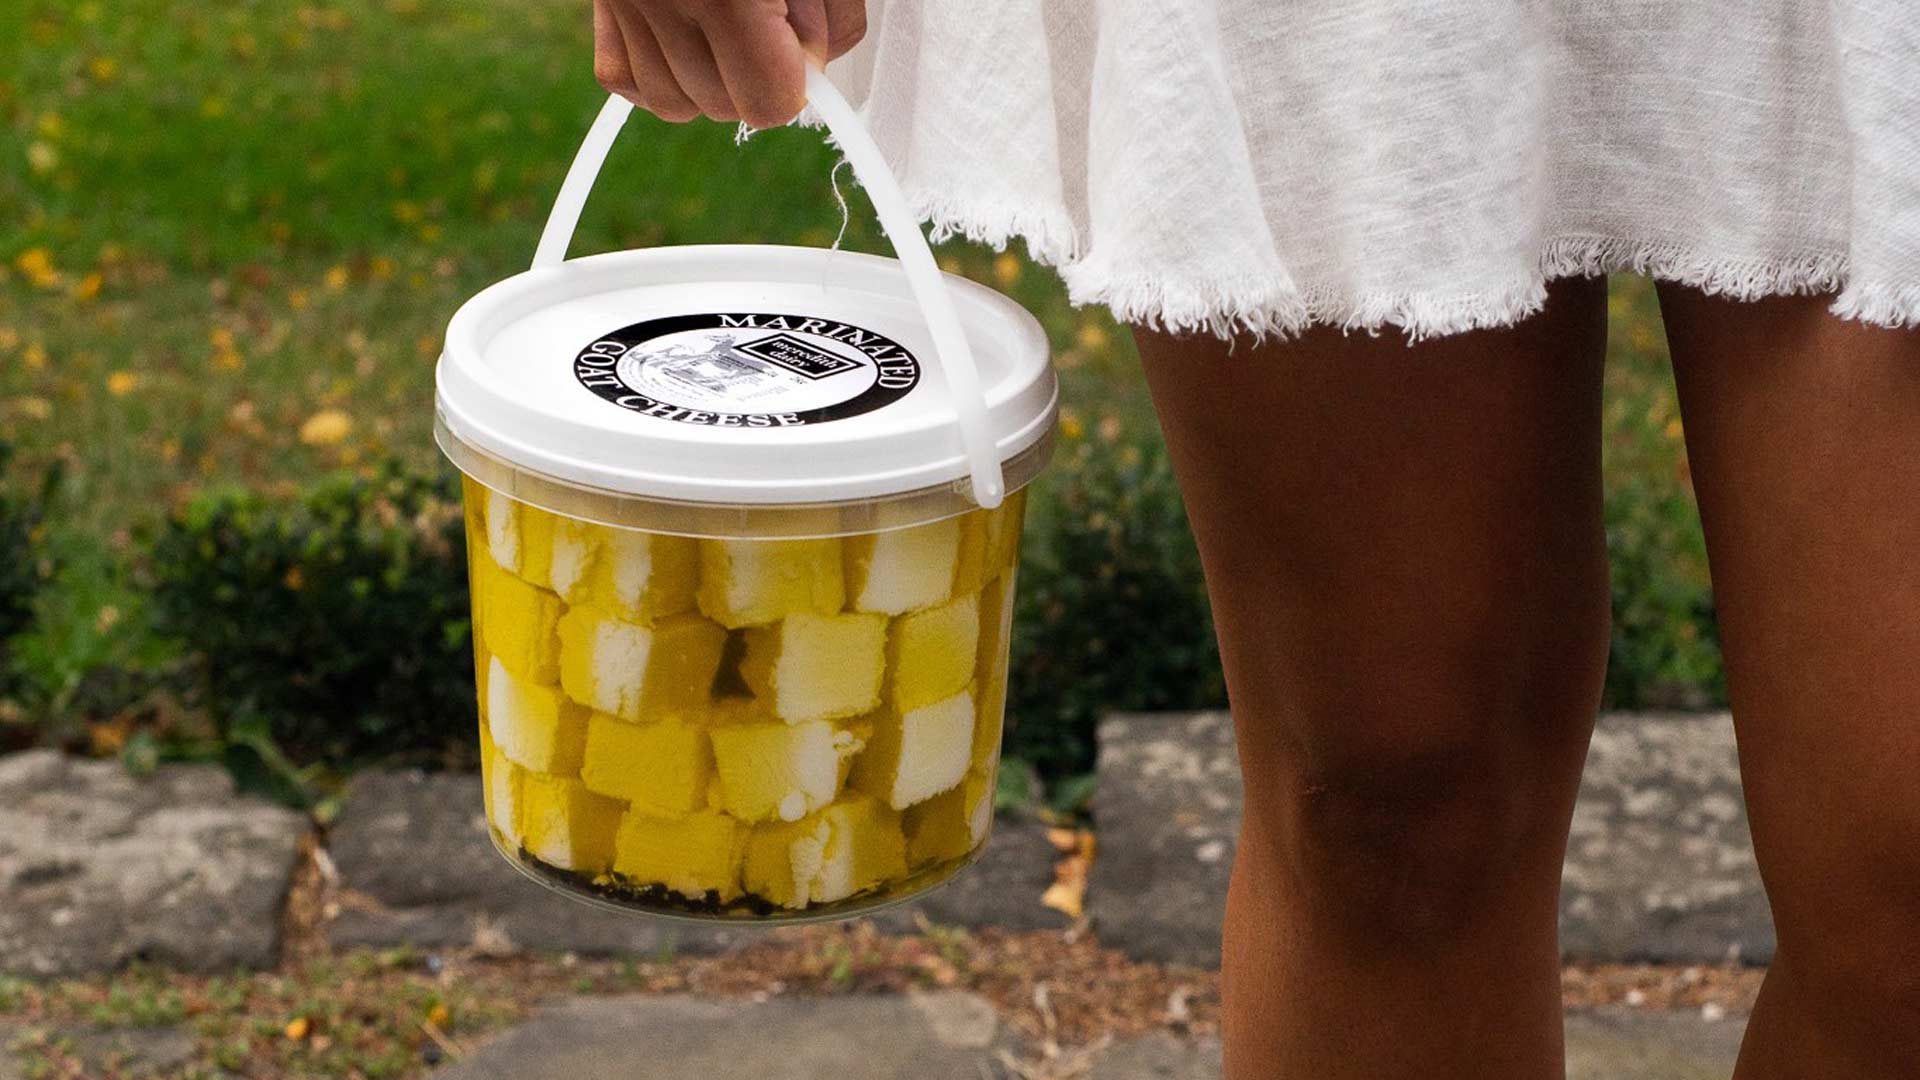 Two Providores Is Selling Two-Kilogram Buckets of Meredith Dairy's Goat's Cheese for Just $60